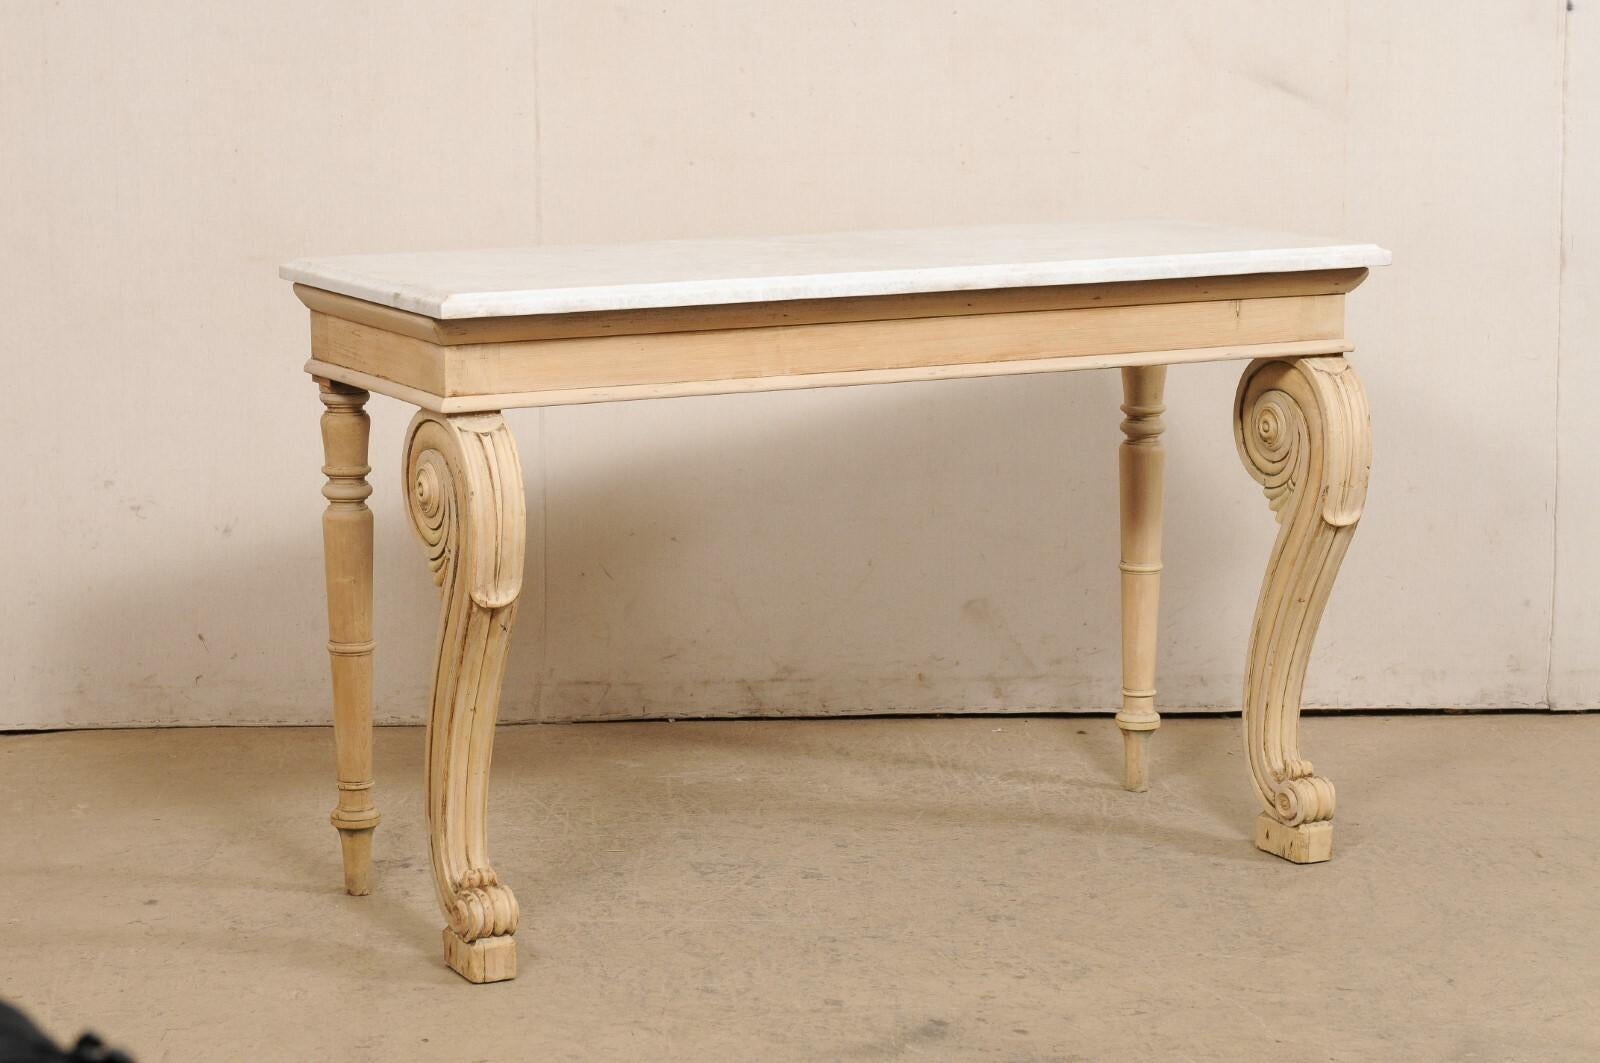 19th Century English Regency Period Bleached Wood Console w/Marble Top & Volute Carved Legs For Sale